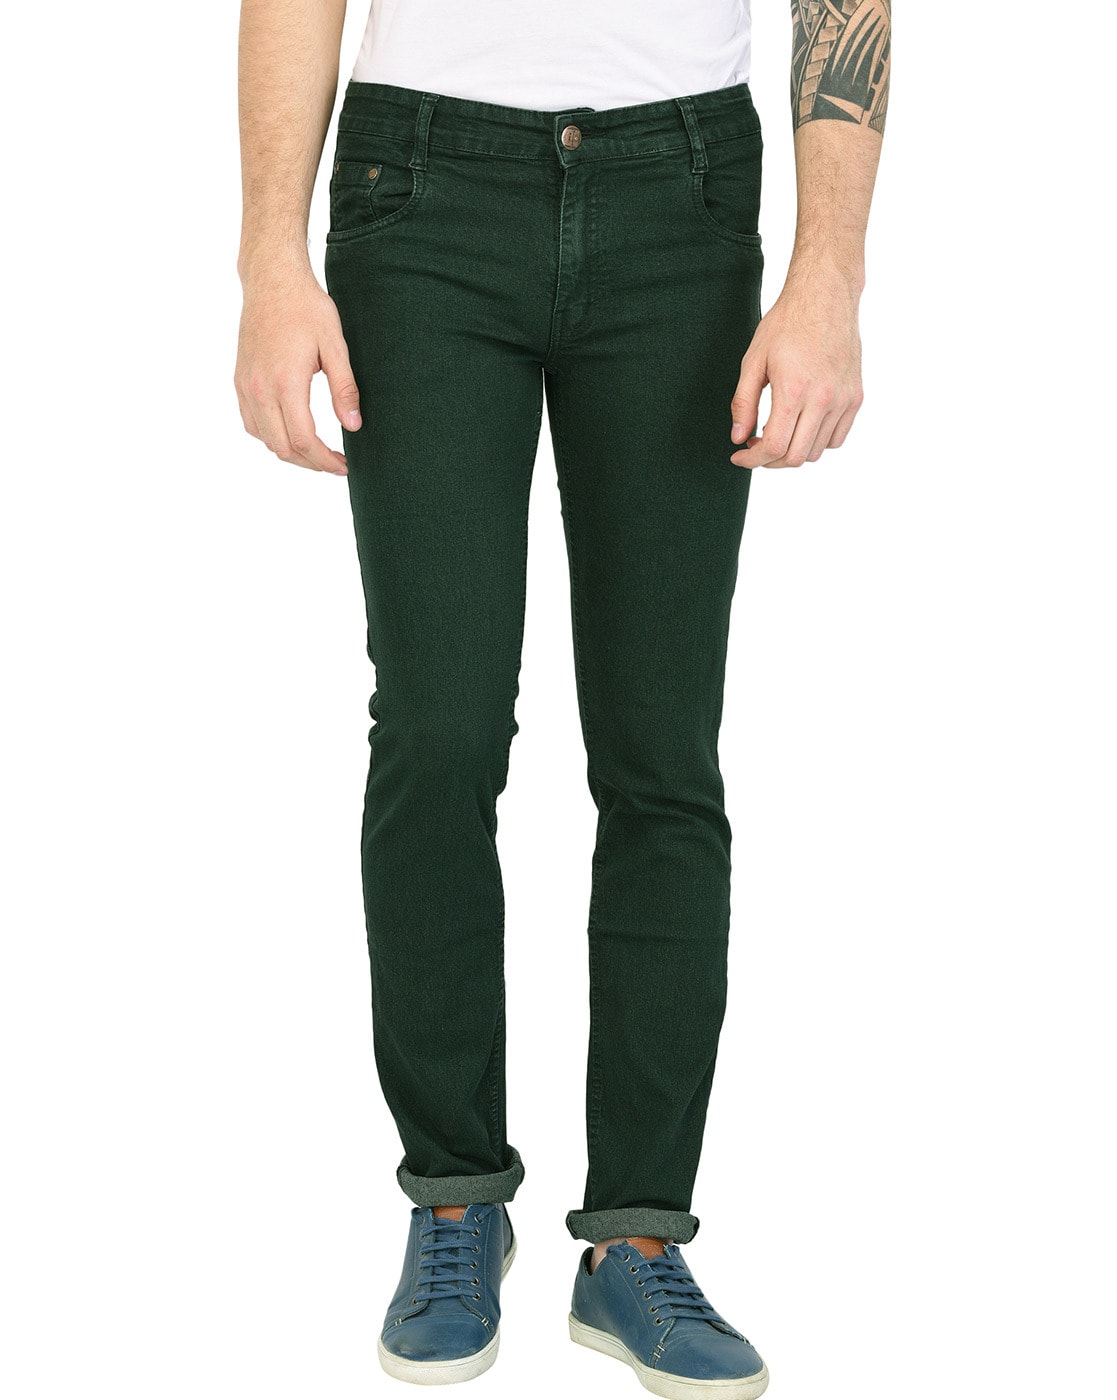 COLLUSION x014 90s baggy jeans in washed green | ASOS